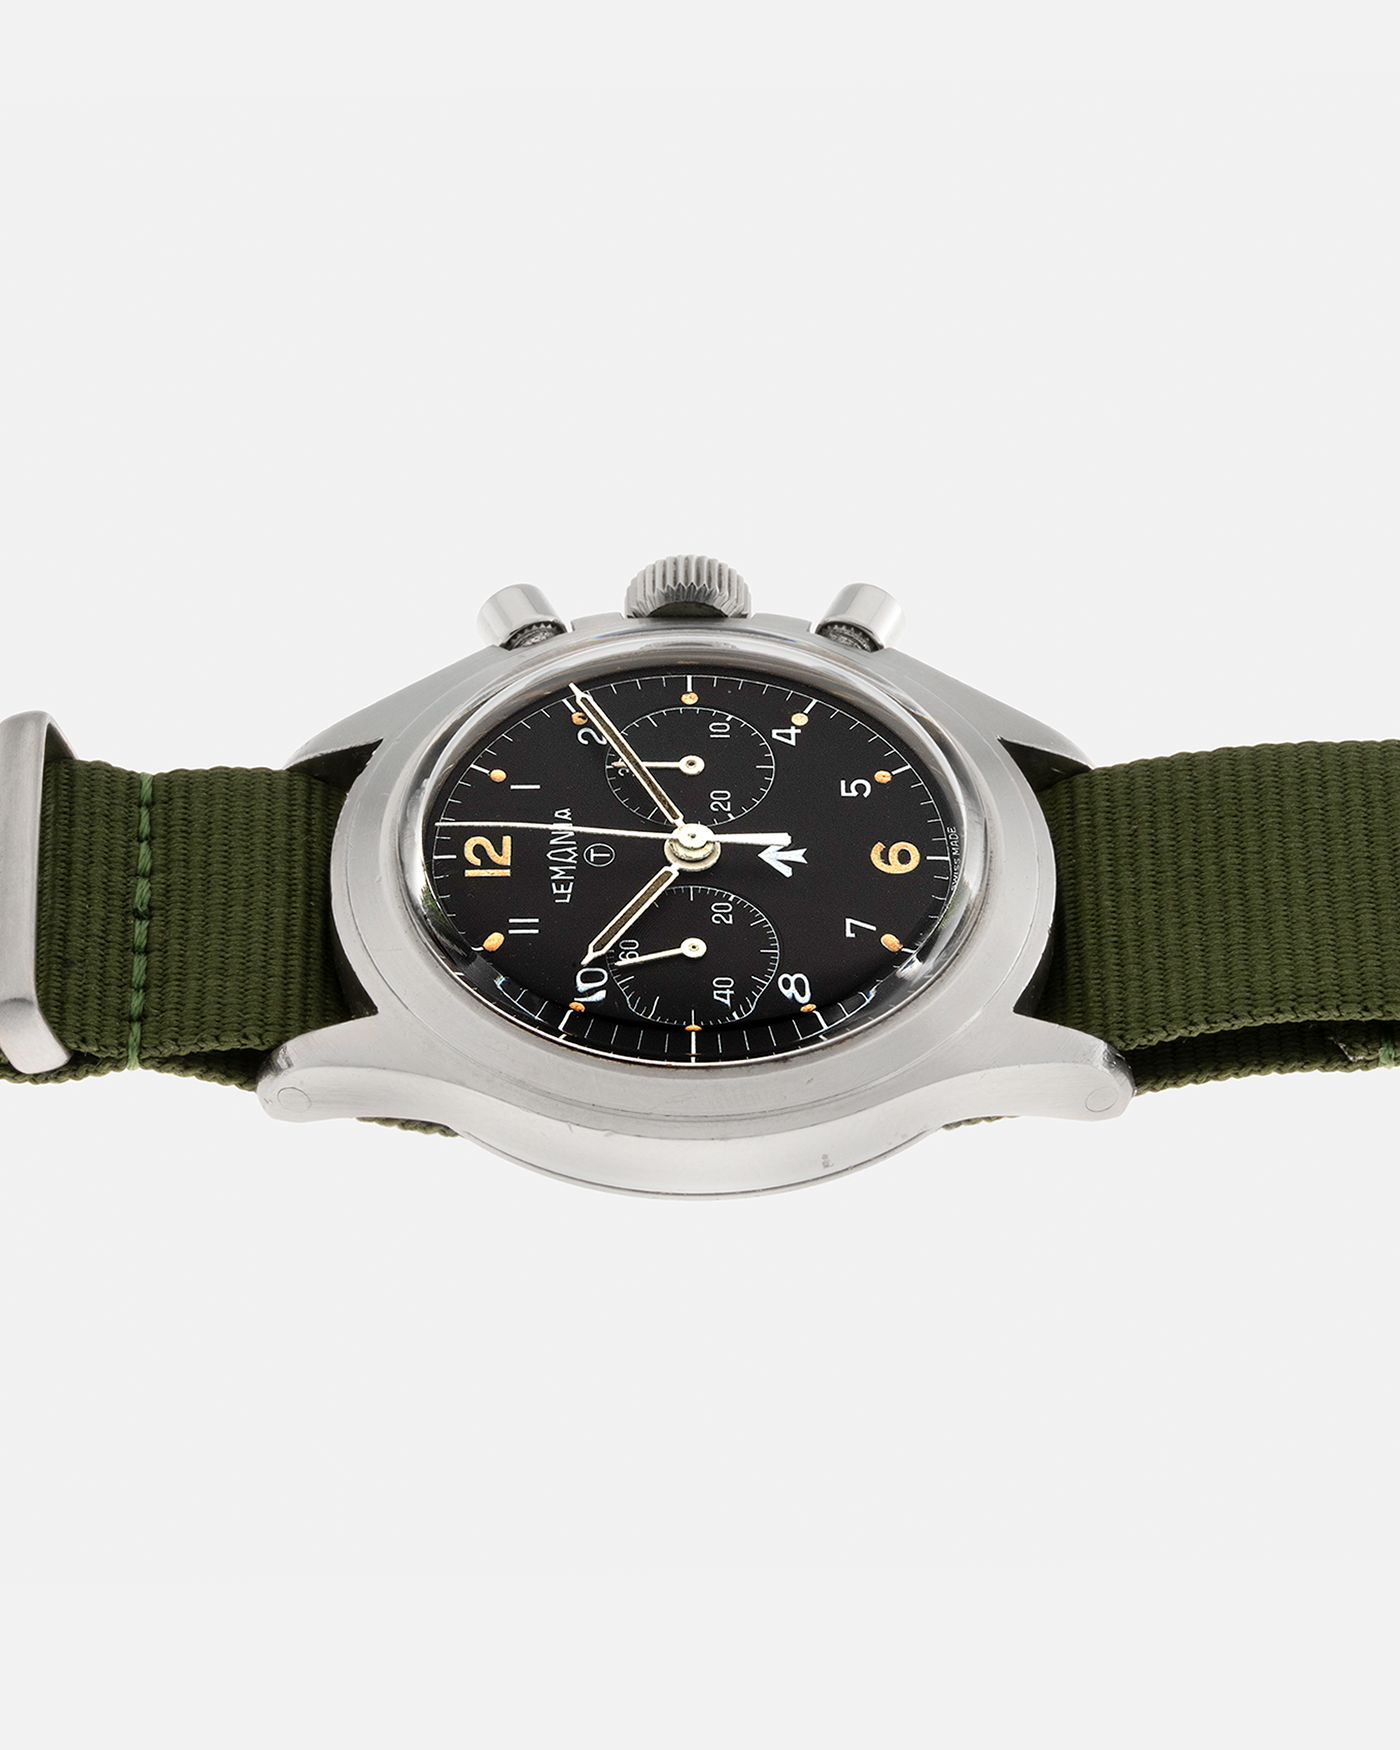 Brand: Lemania Year: 1975 Model: ‘Double Pusher’ Royal Navy Chronograph, Estimated 500 pieces only Reference Number: 818 Material: Stainless Steel Movement: Lemania 2220, Manual-Winding Case Diameter: 40mm Lug Width: 20mm Strap: Auricoste Military Green NATO Strap